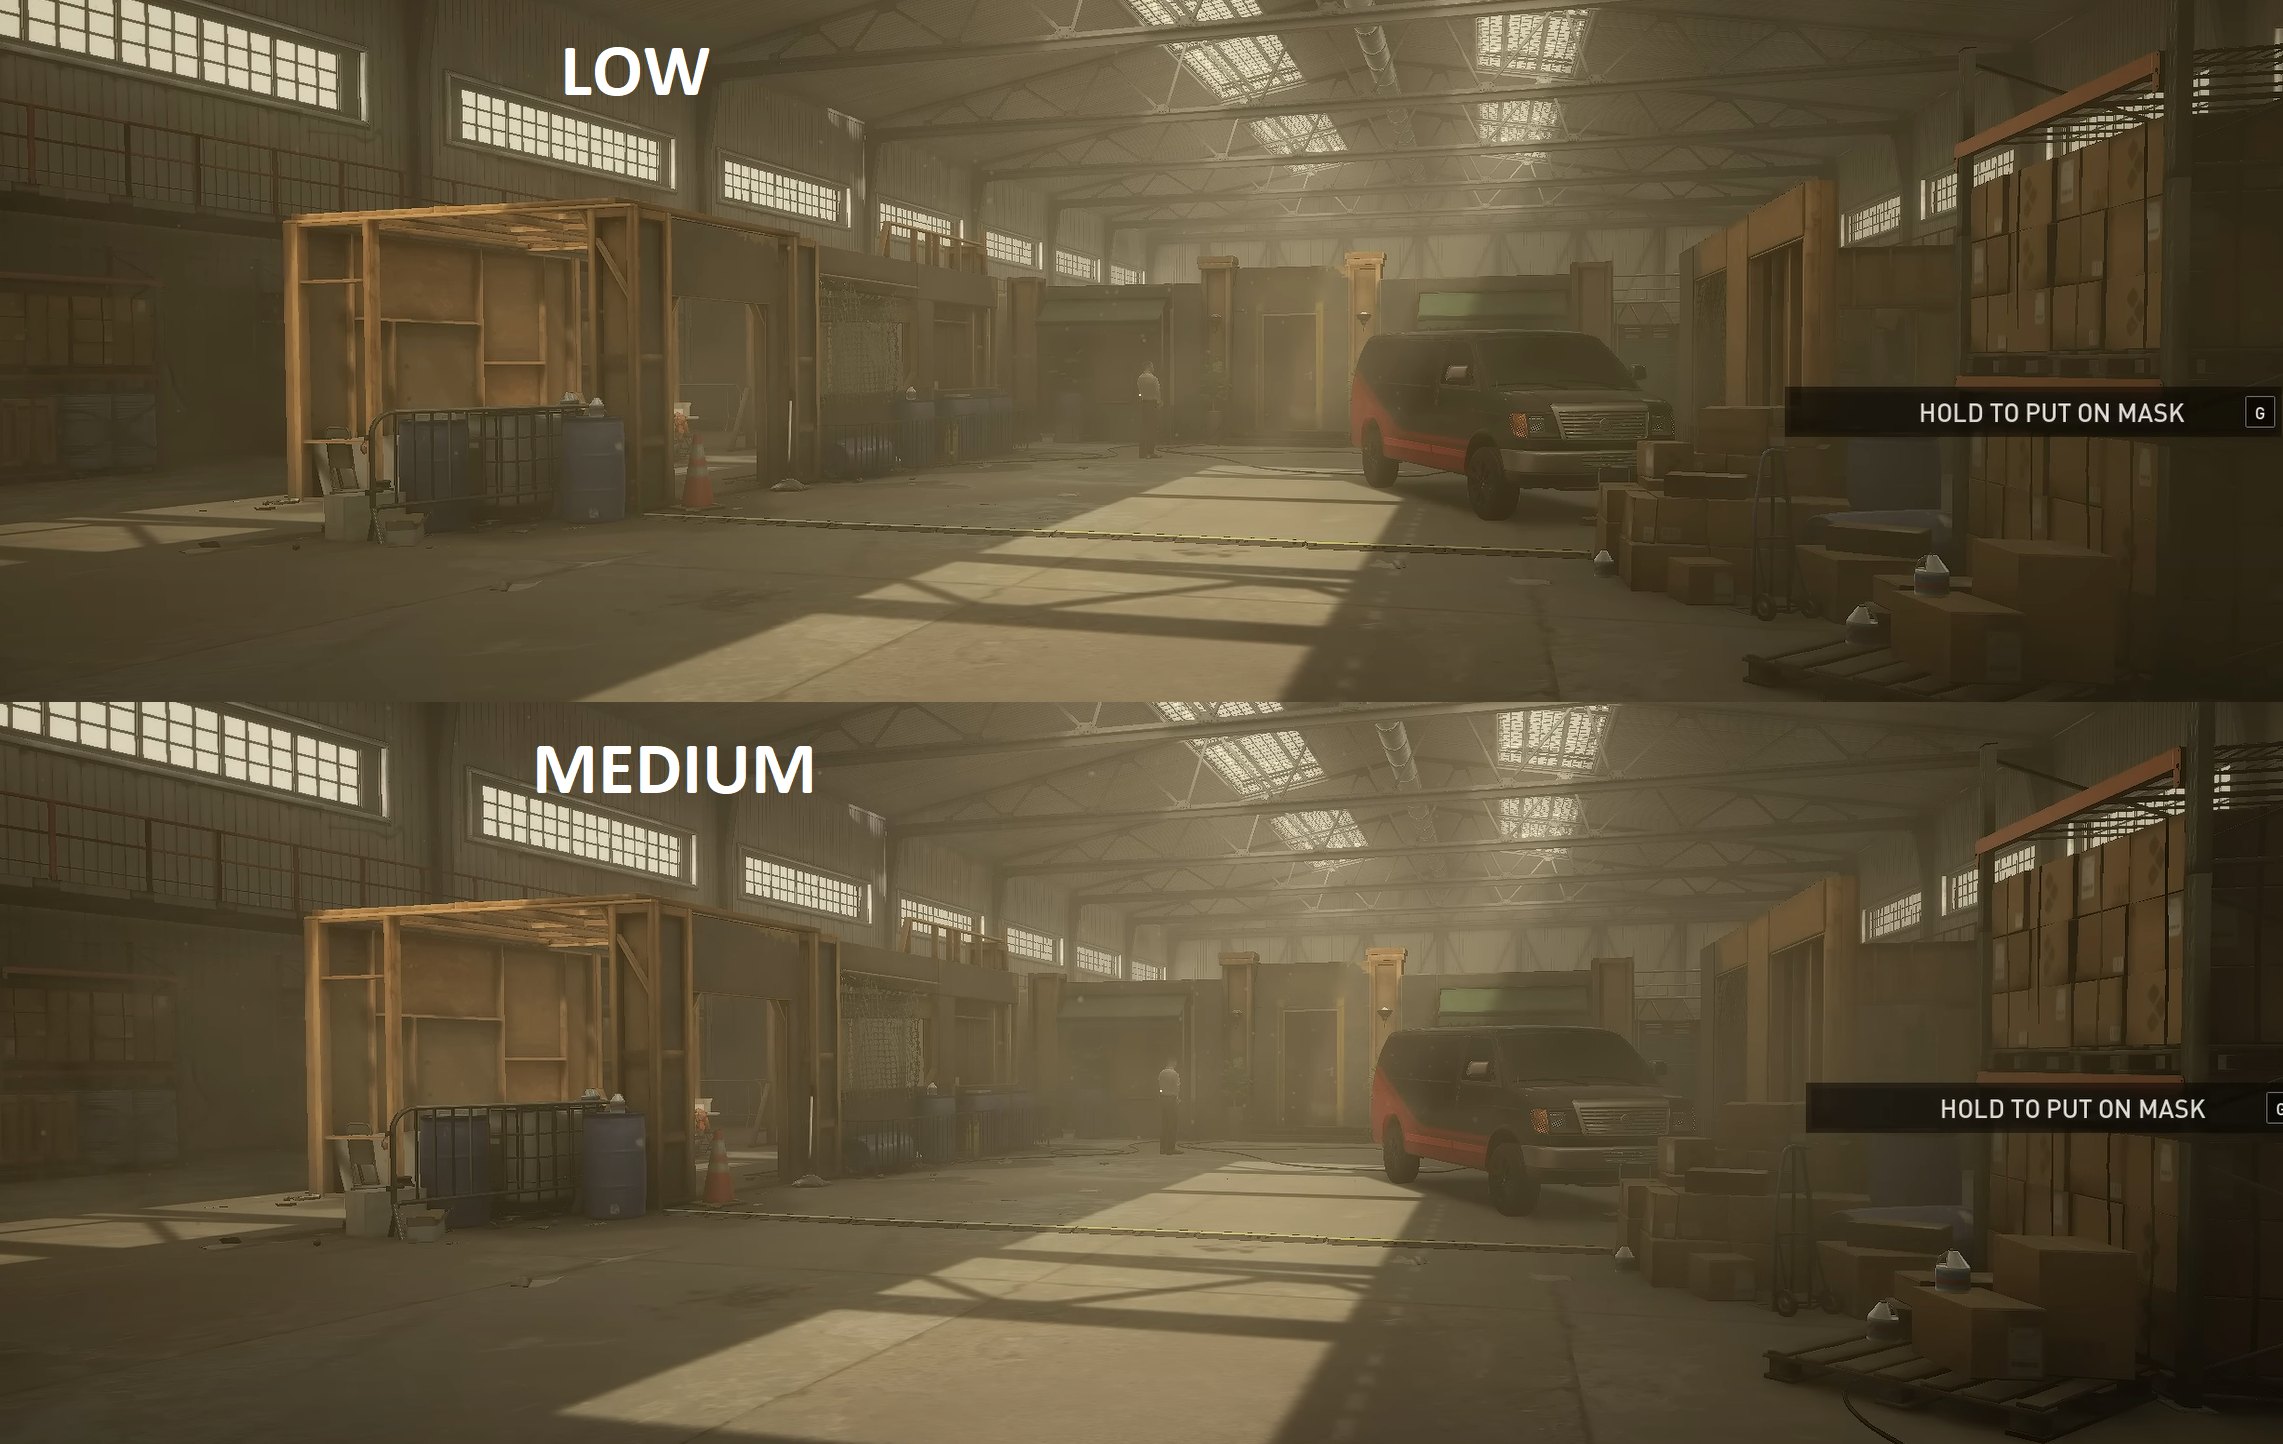 Low Vs Medium Effects in Payday 3